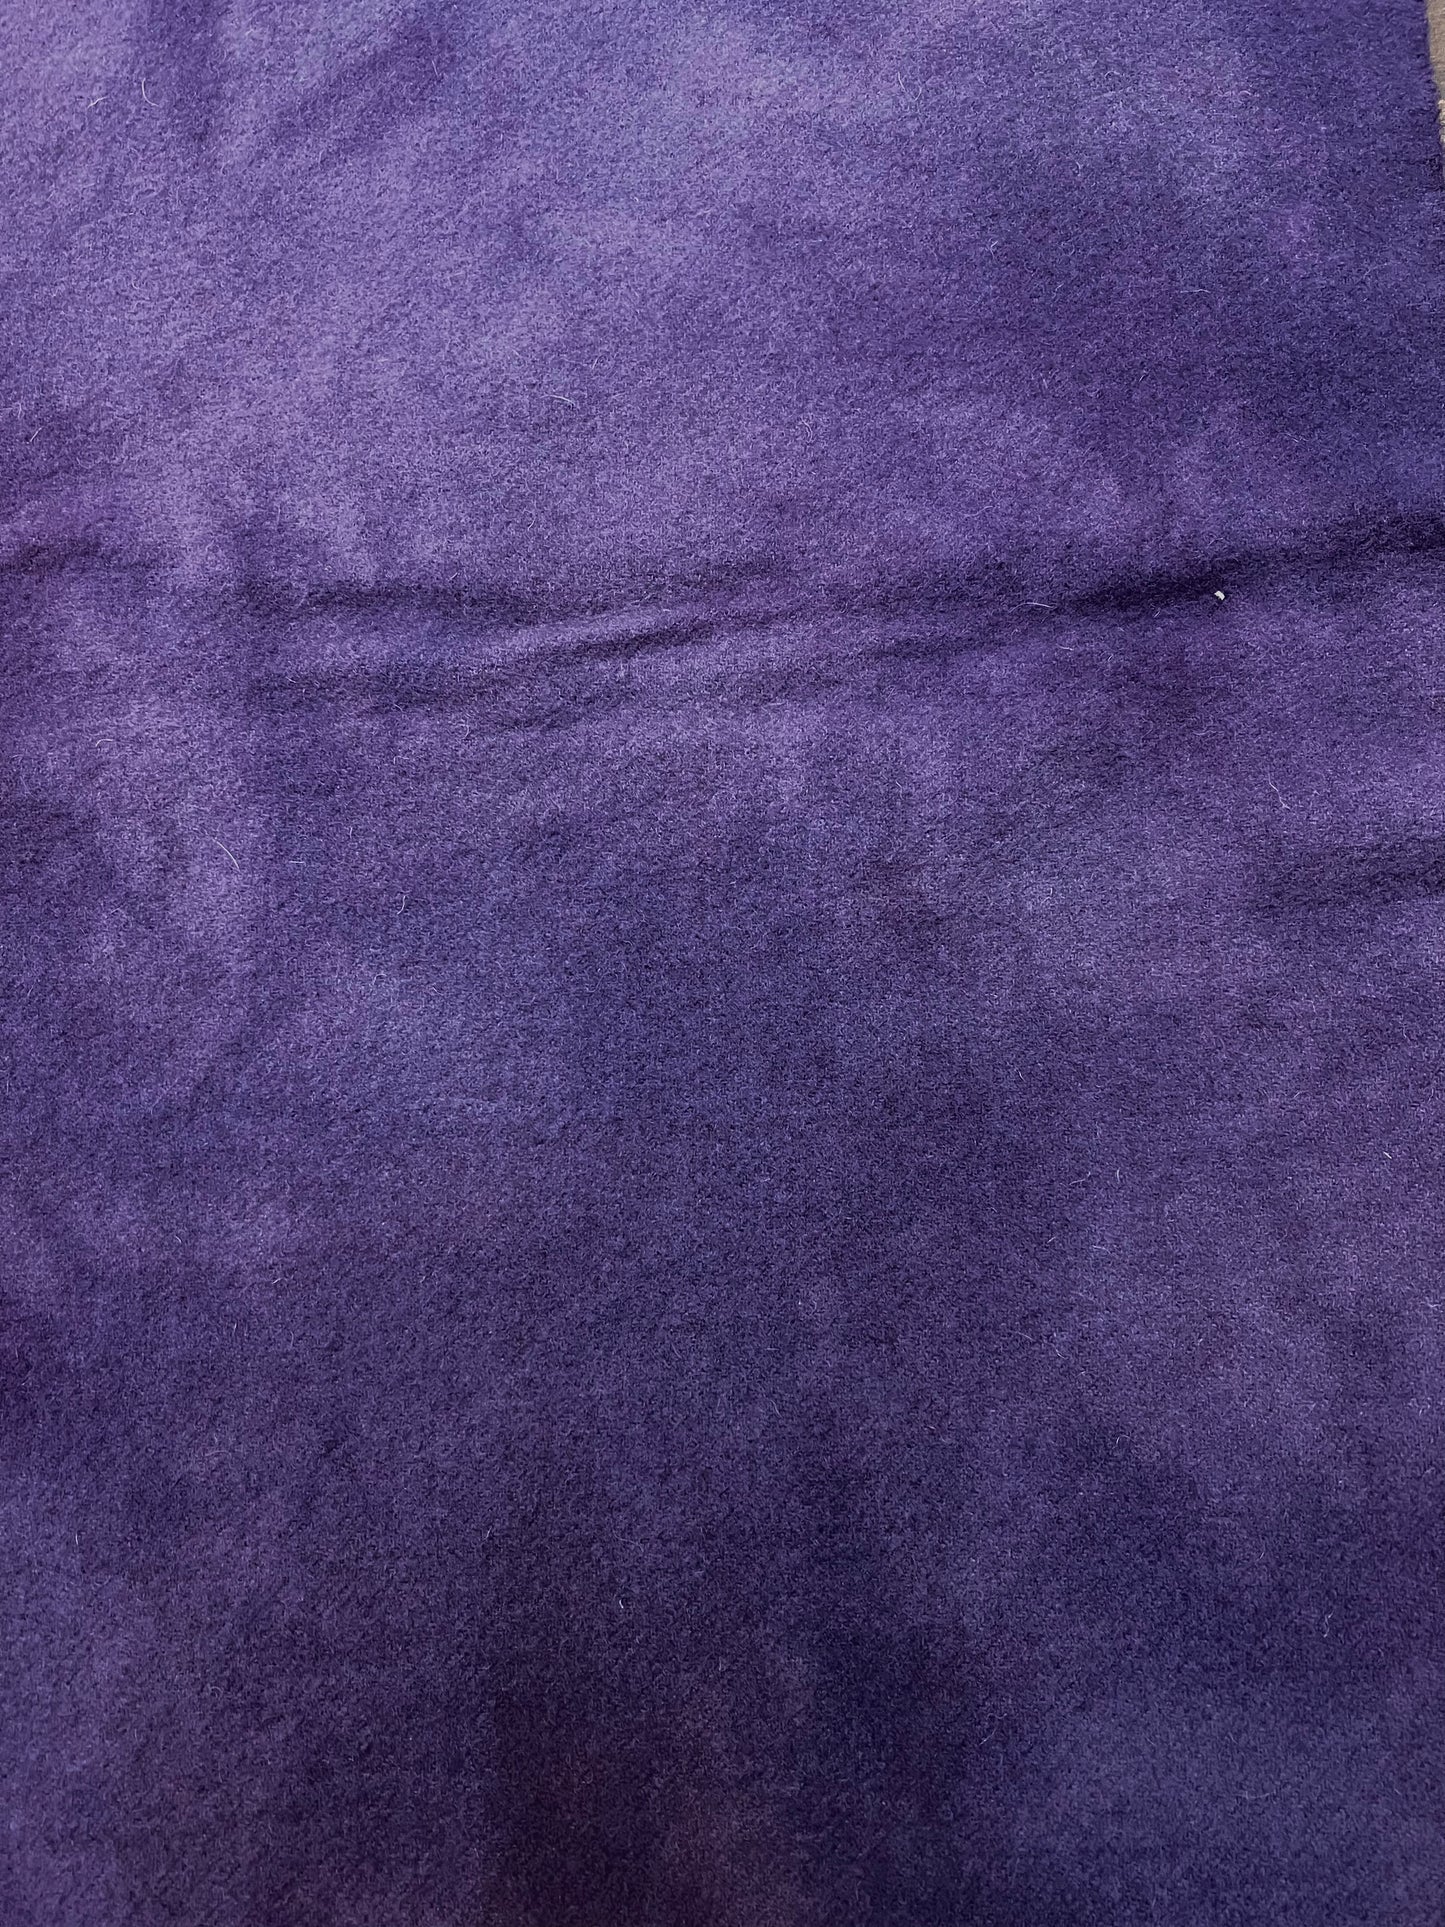 Hand Dyed Wool, Fat Quarter, WILD PURPLE ORCHID